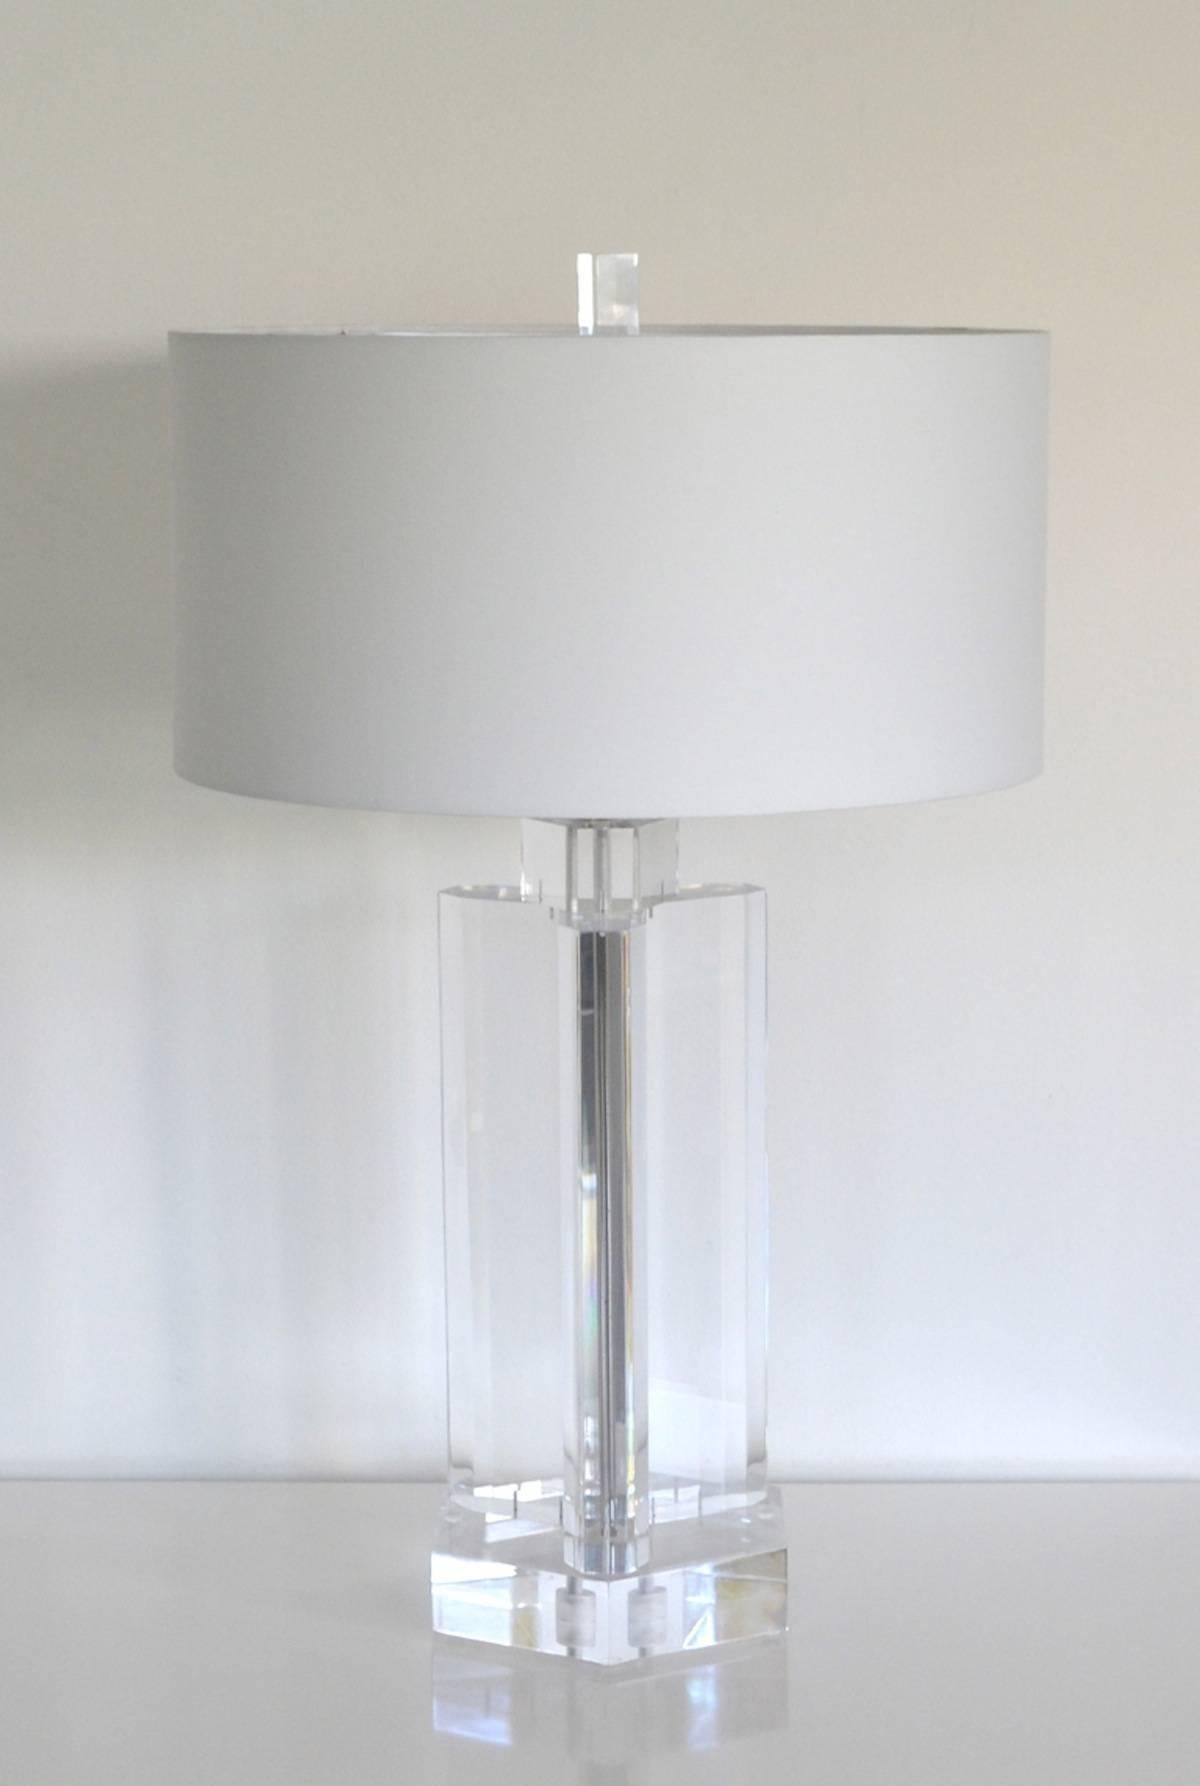 Midcentury Stunning Geometric Form Lucite Table Lamp In Good Condition For Sale In West Palm Beach, FL